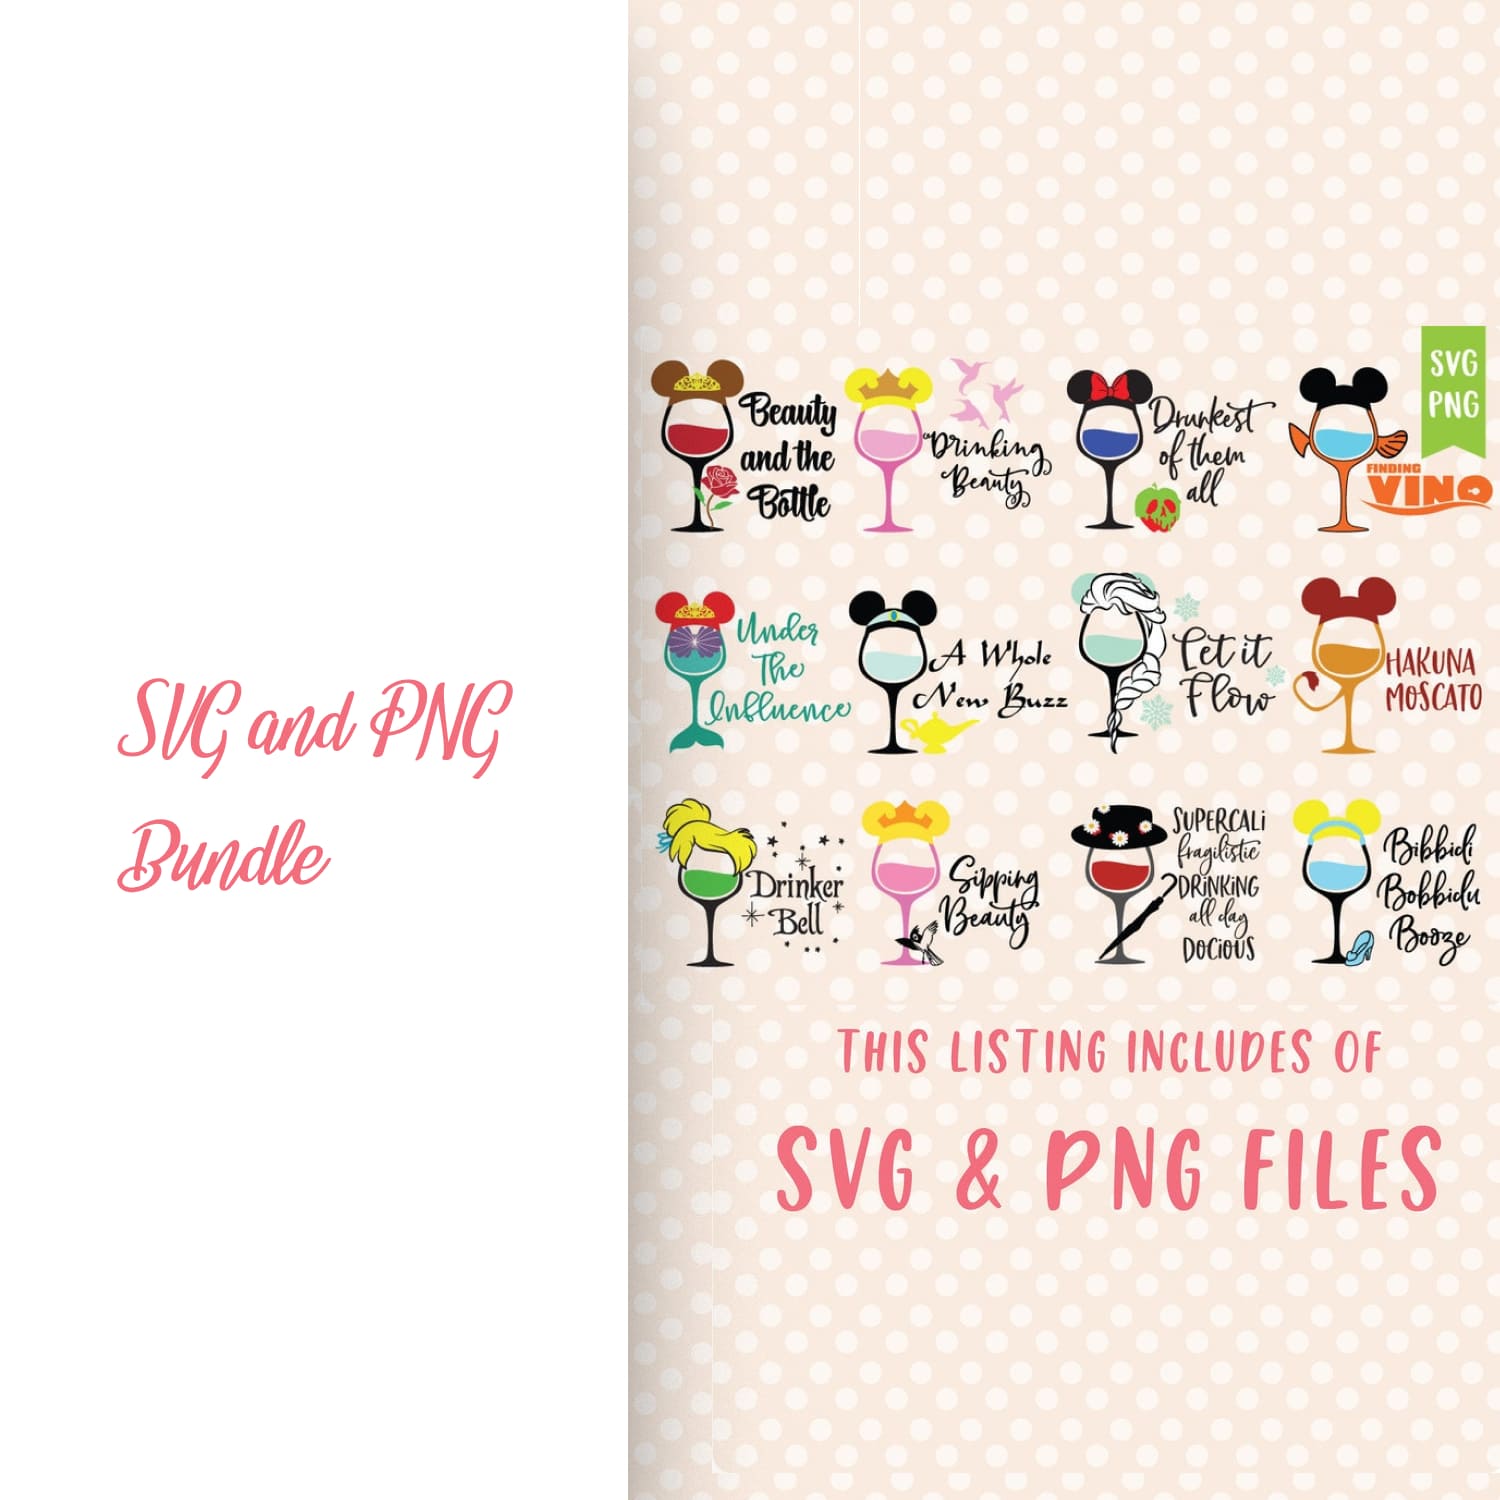 SVG and PNG Bundle #19 - 12 Layered Files.